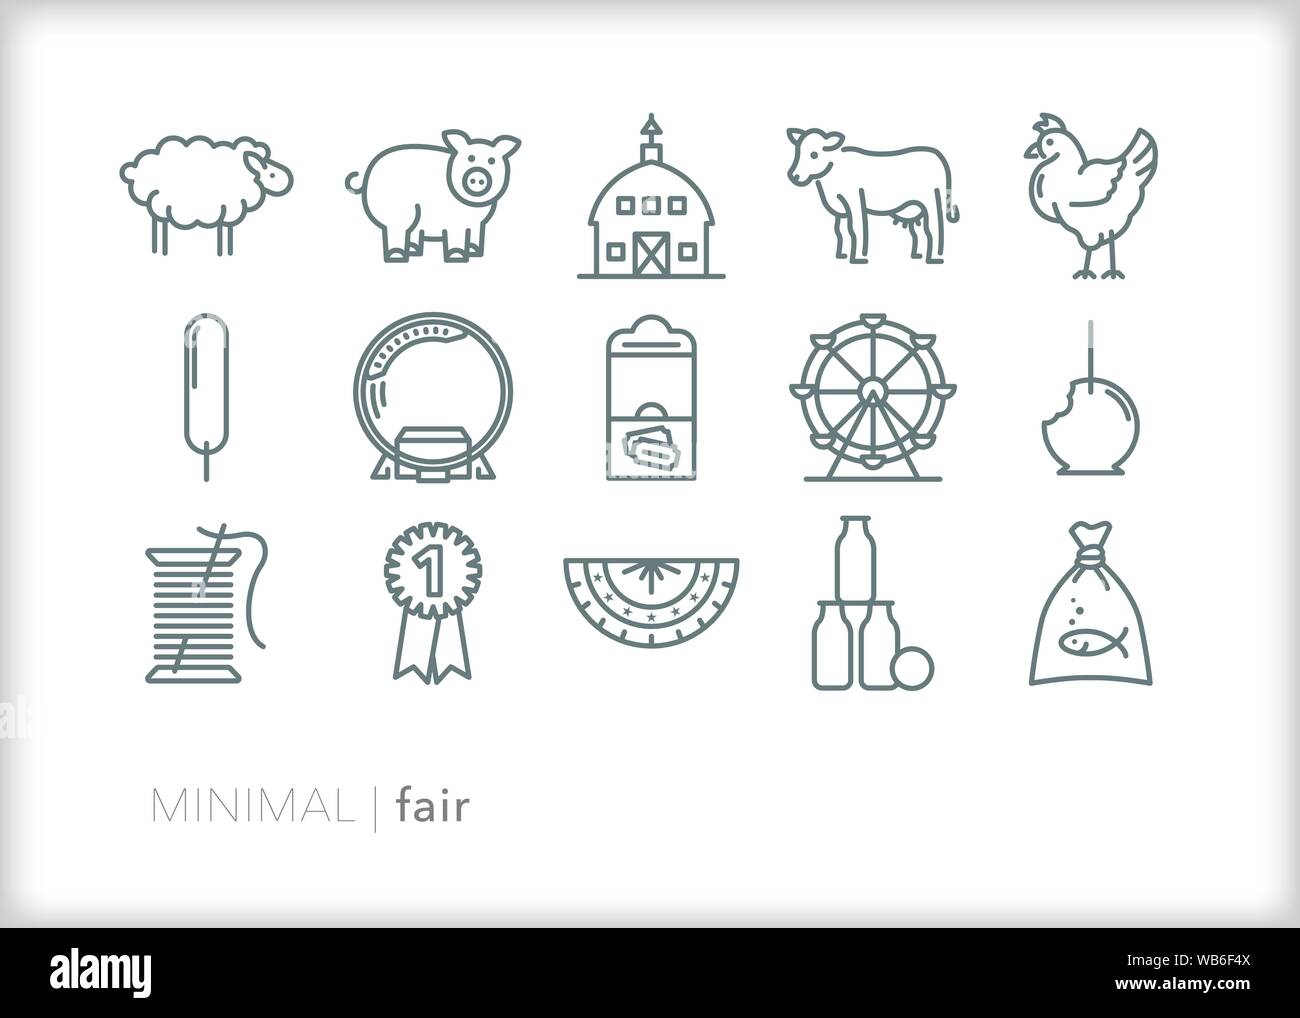 Set of 15 fair line icons for summer tradition of showing animals, agriculture and crafts Stock Vector